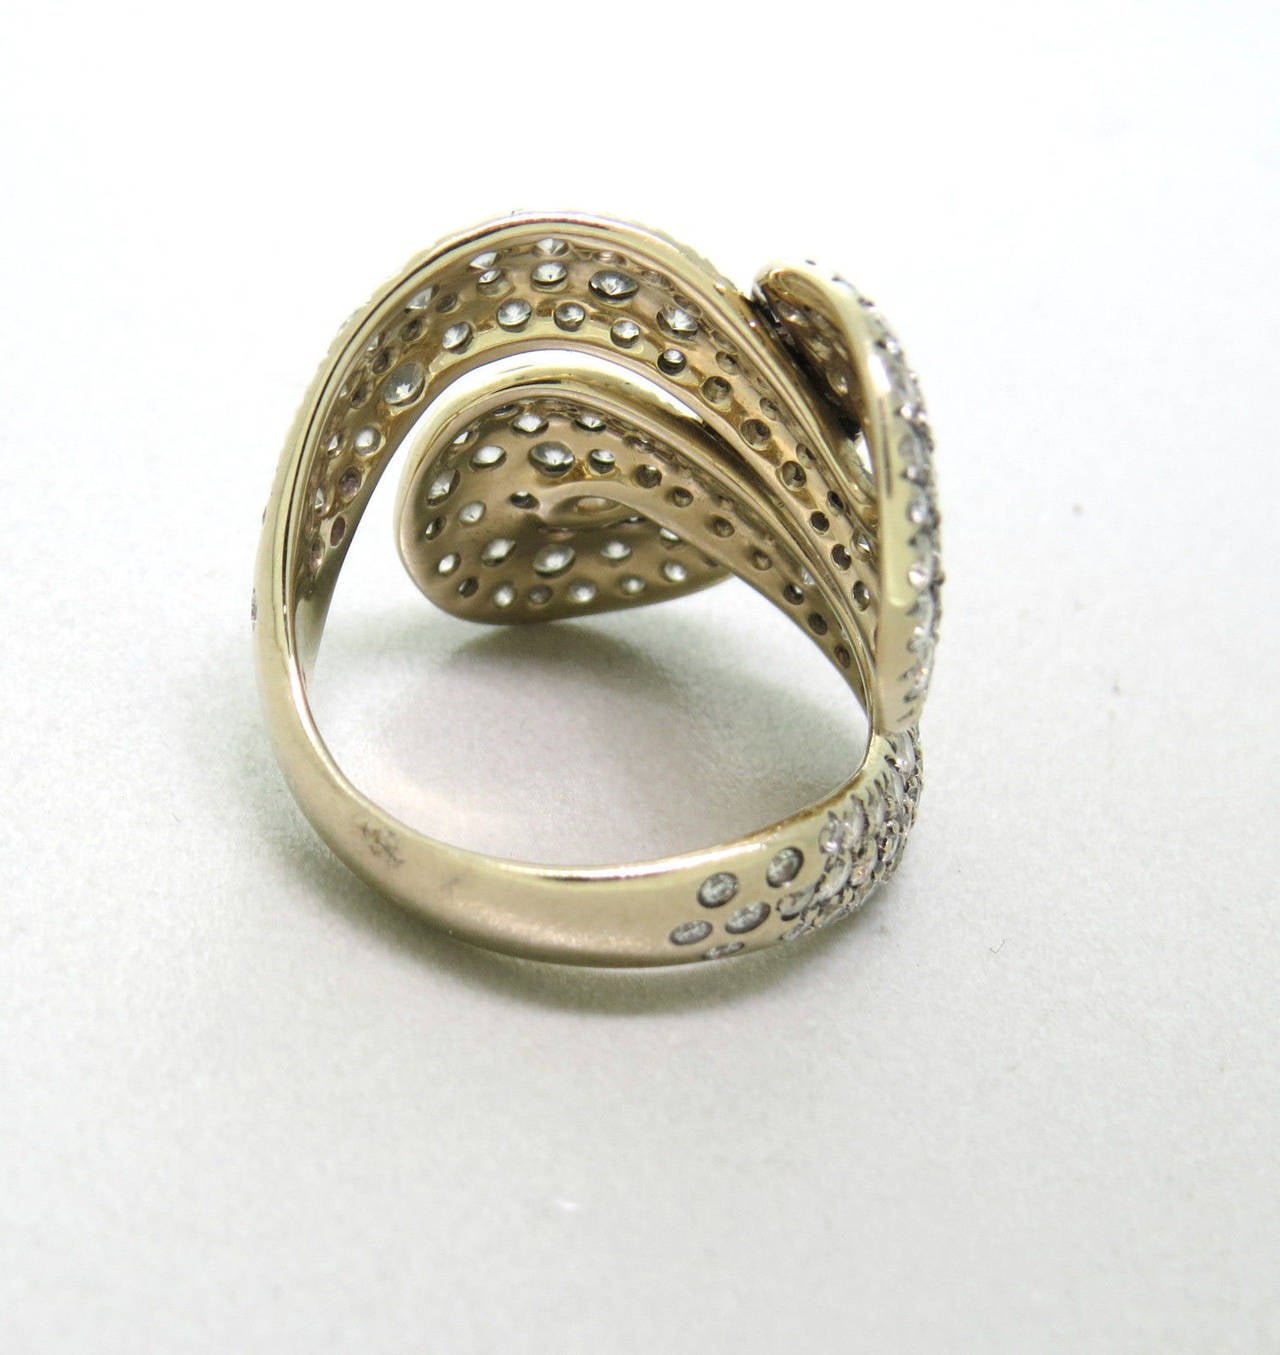 Impressive 18k gold and fancy diamond ring, crafted by H Stern for Celtic Dunes collection, featuring 2.97ctw in diamonds. Ring is a size 7, Top Of Ring 25mm x 27mm. Marked with Star hallmark and 18k. Weight of the piece - 8.7 grams
Retails for